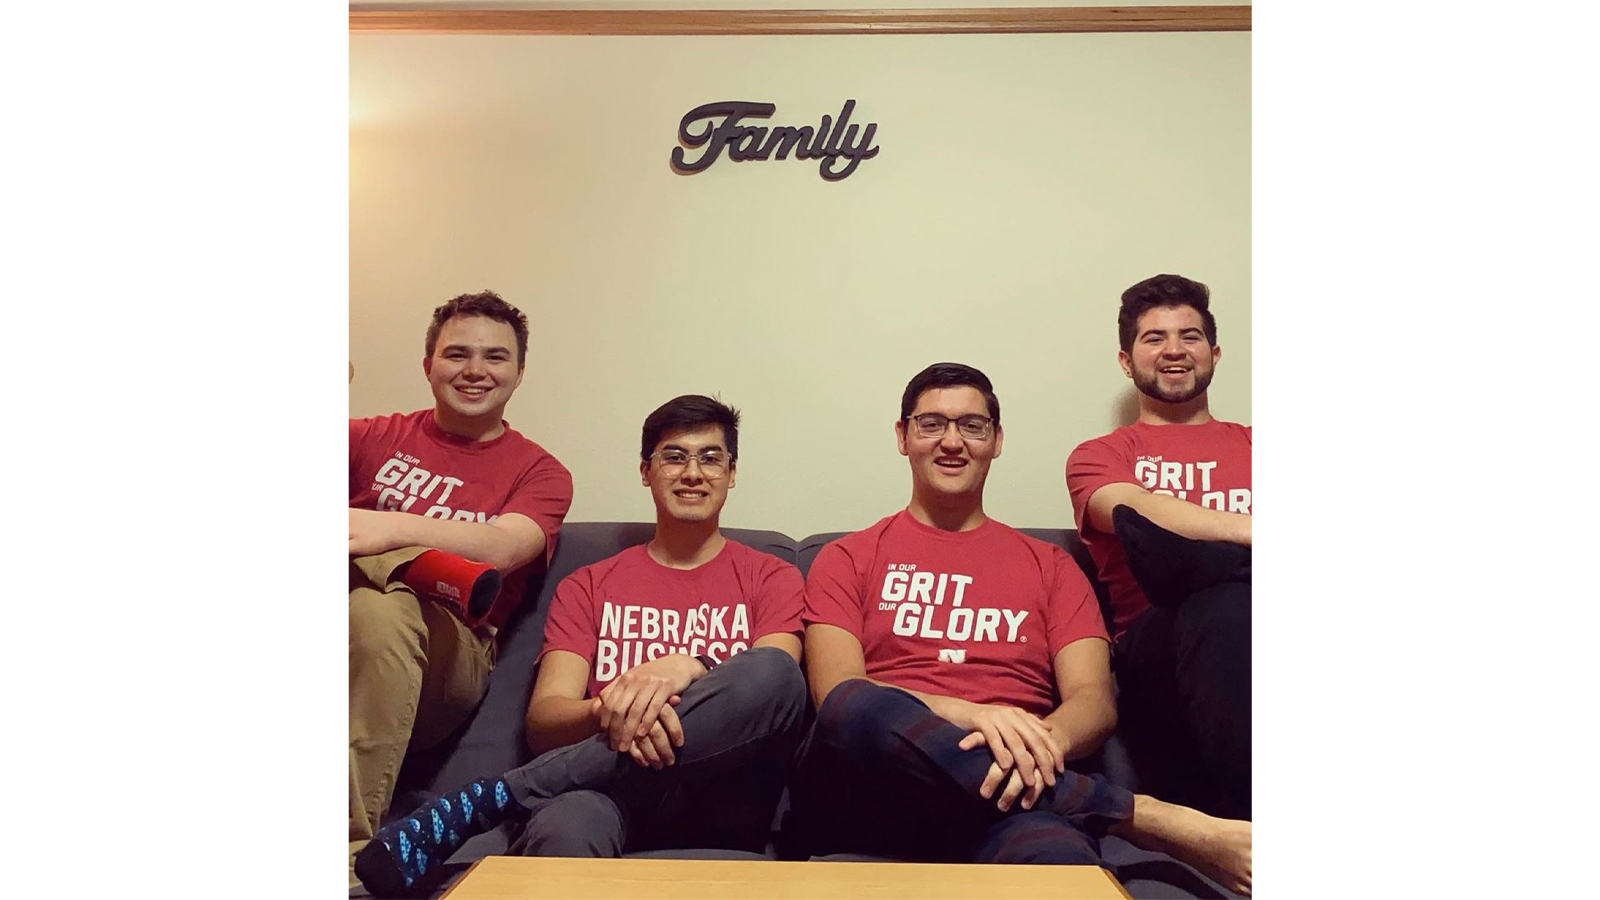 Alex Heraty, a senior marketing major, and friends showed some love for the suite-life offered by University Housing. Learn more at https://go.unl.edu/roch.